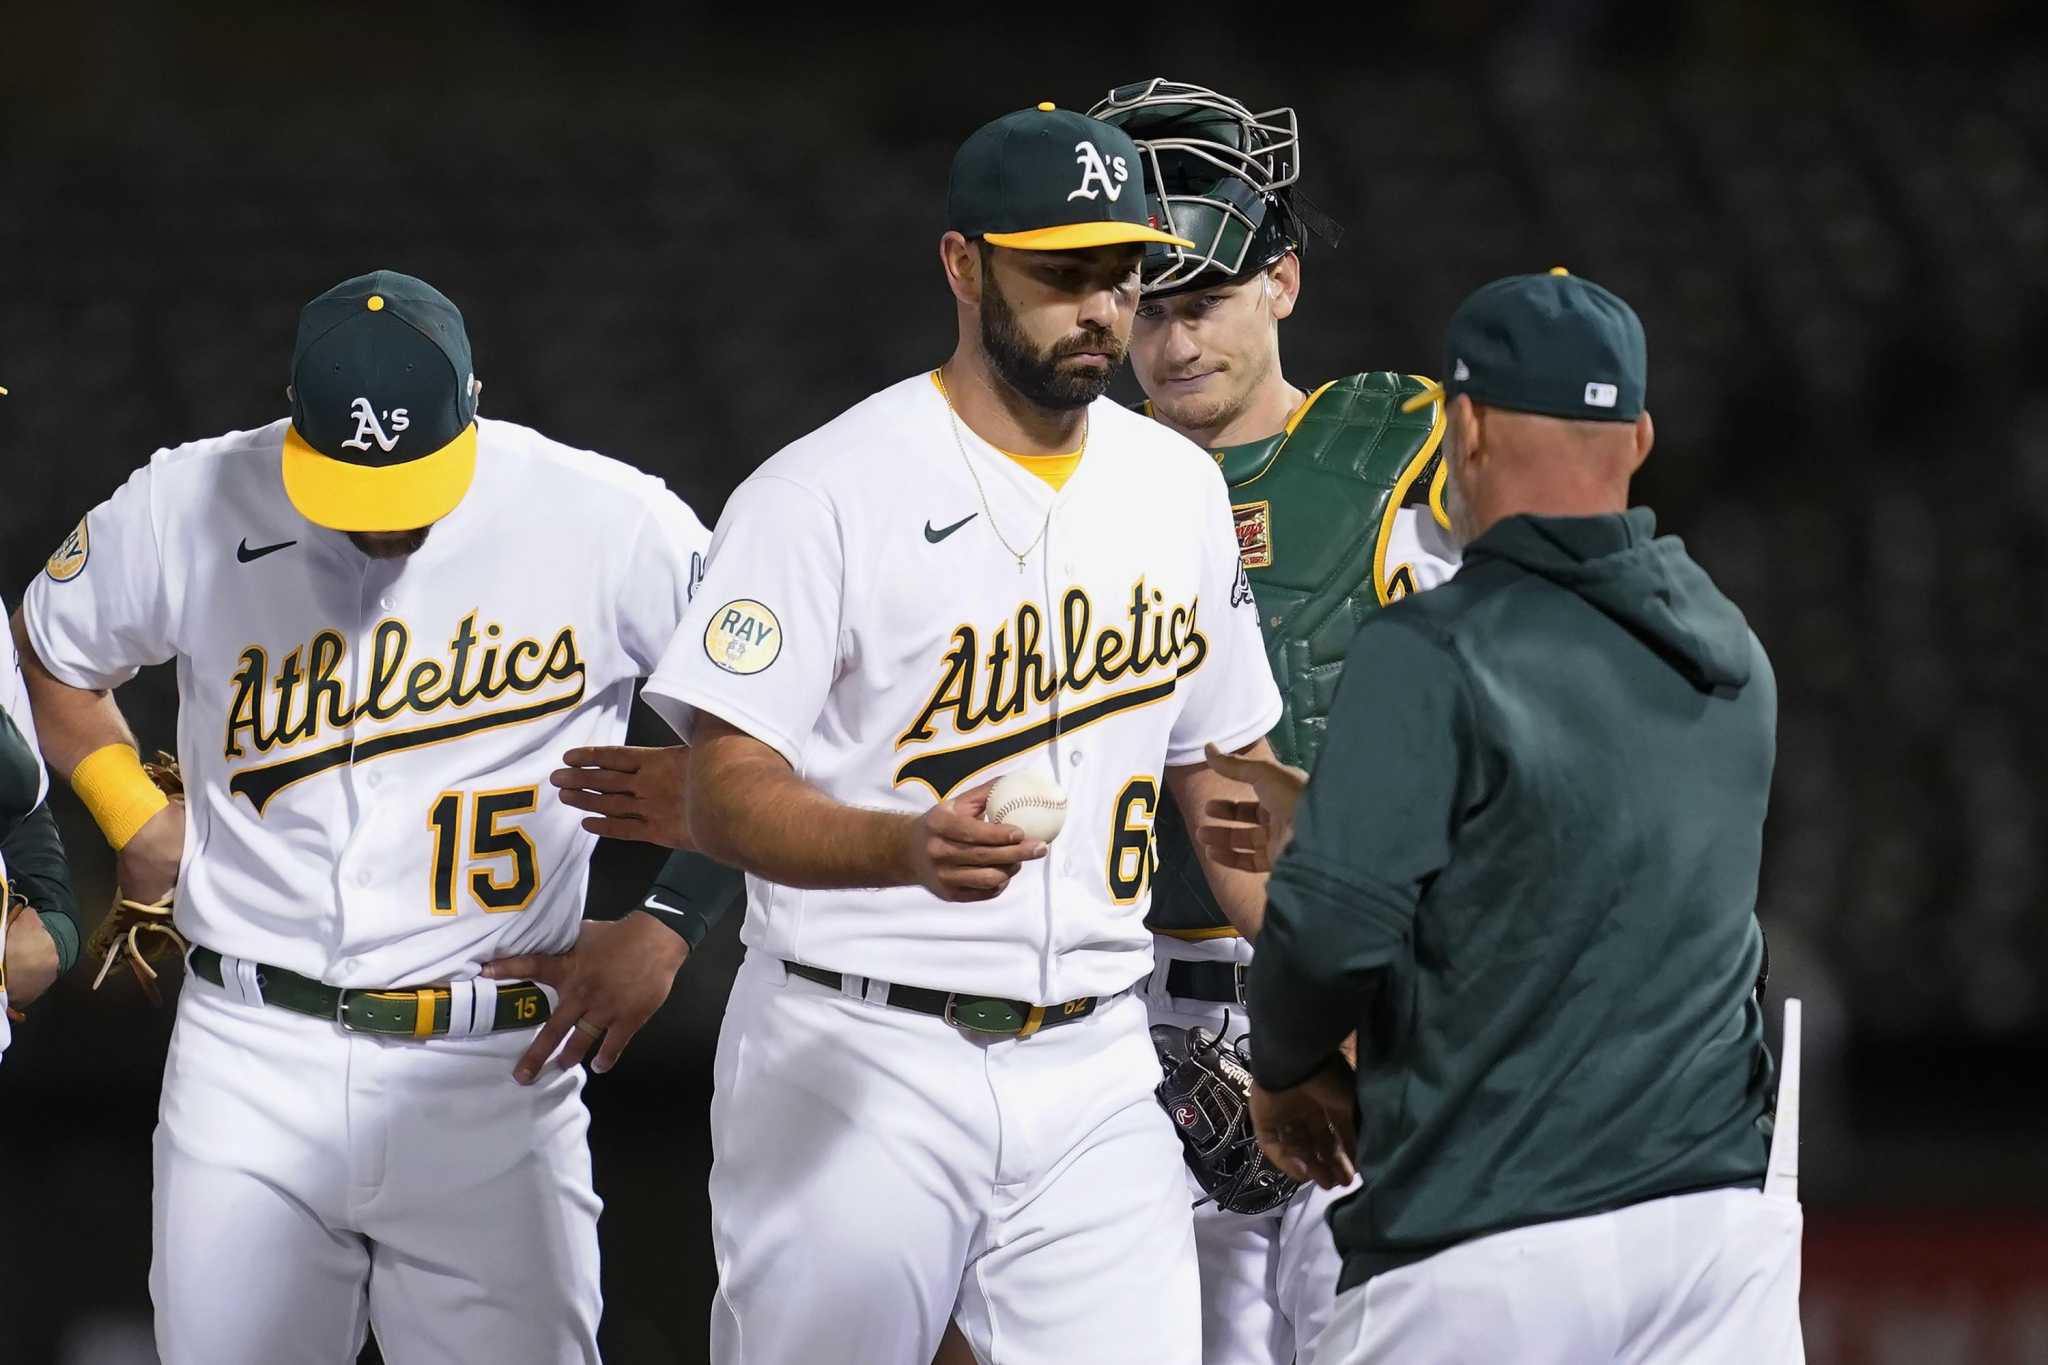 A's let ninth-inning lead slip away in 10-7 loss to Rays